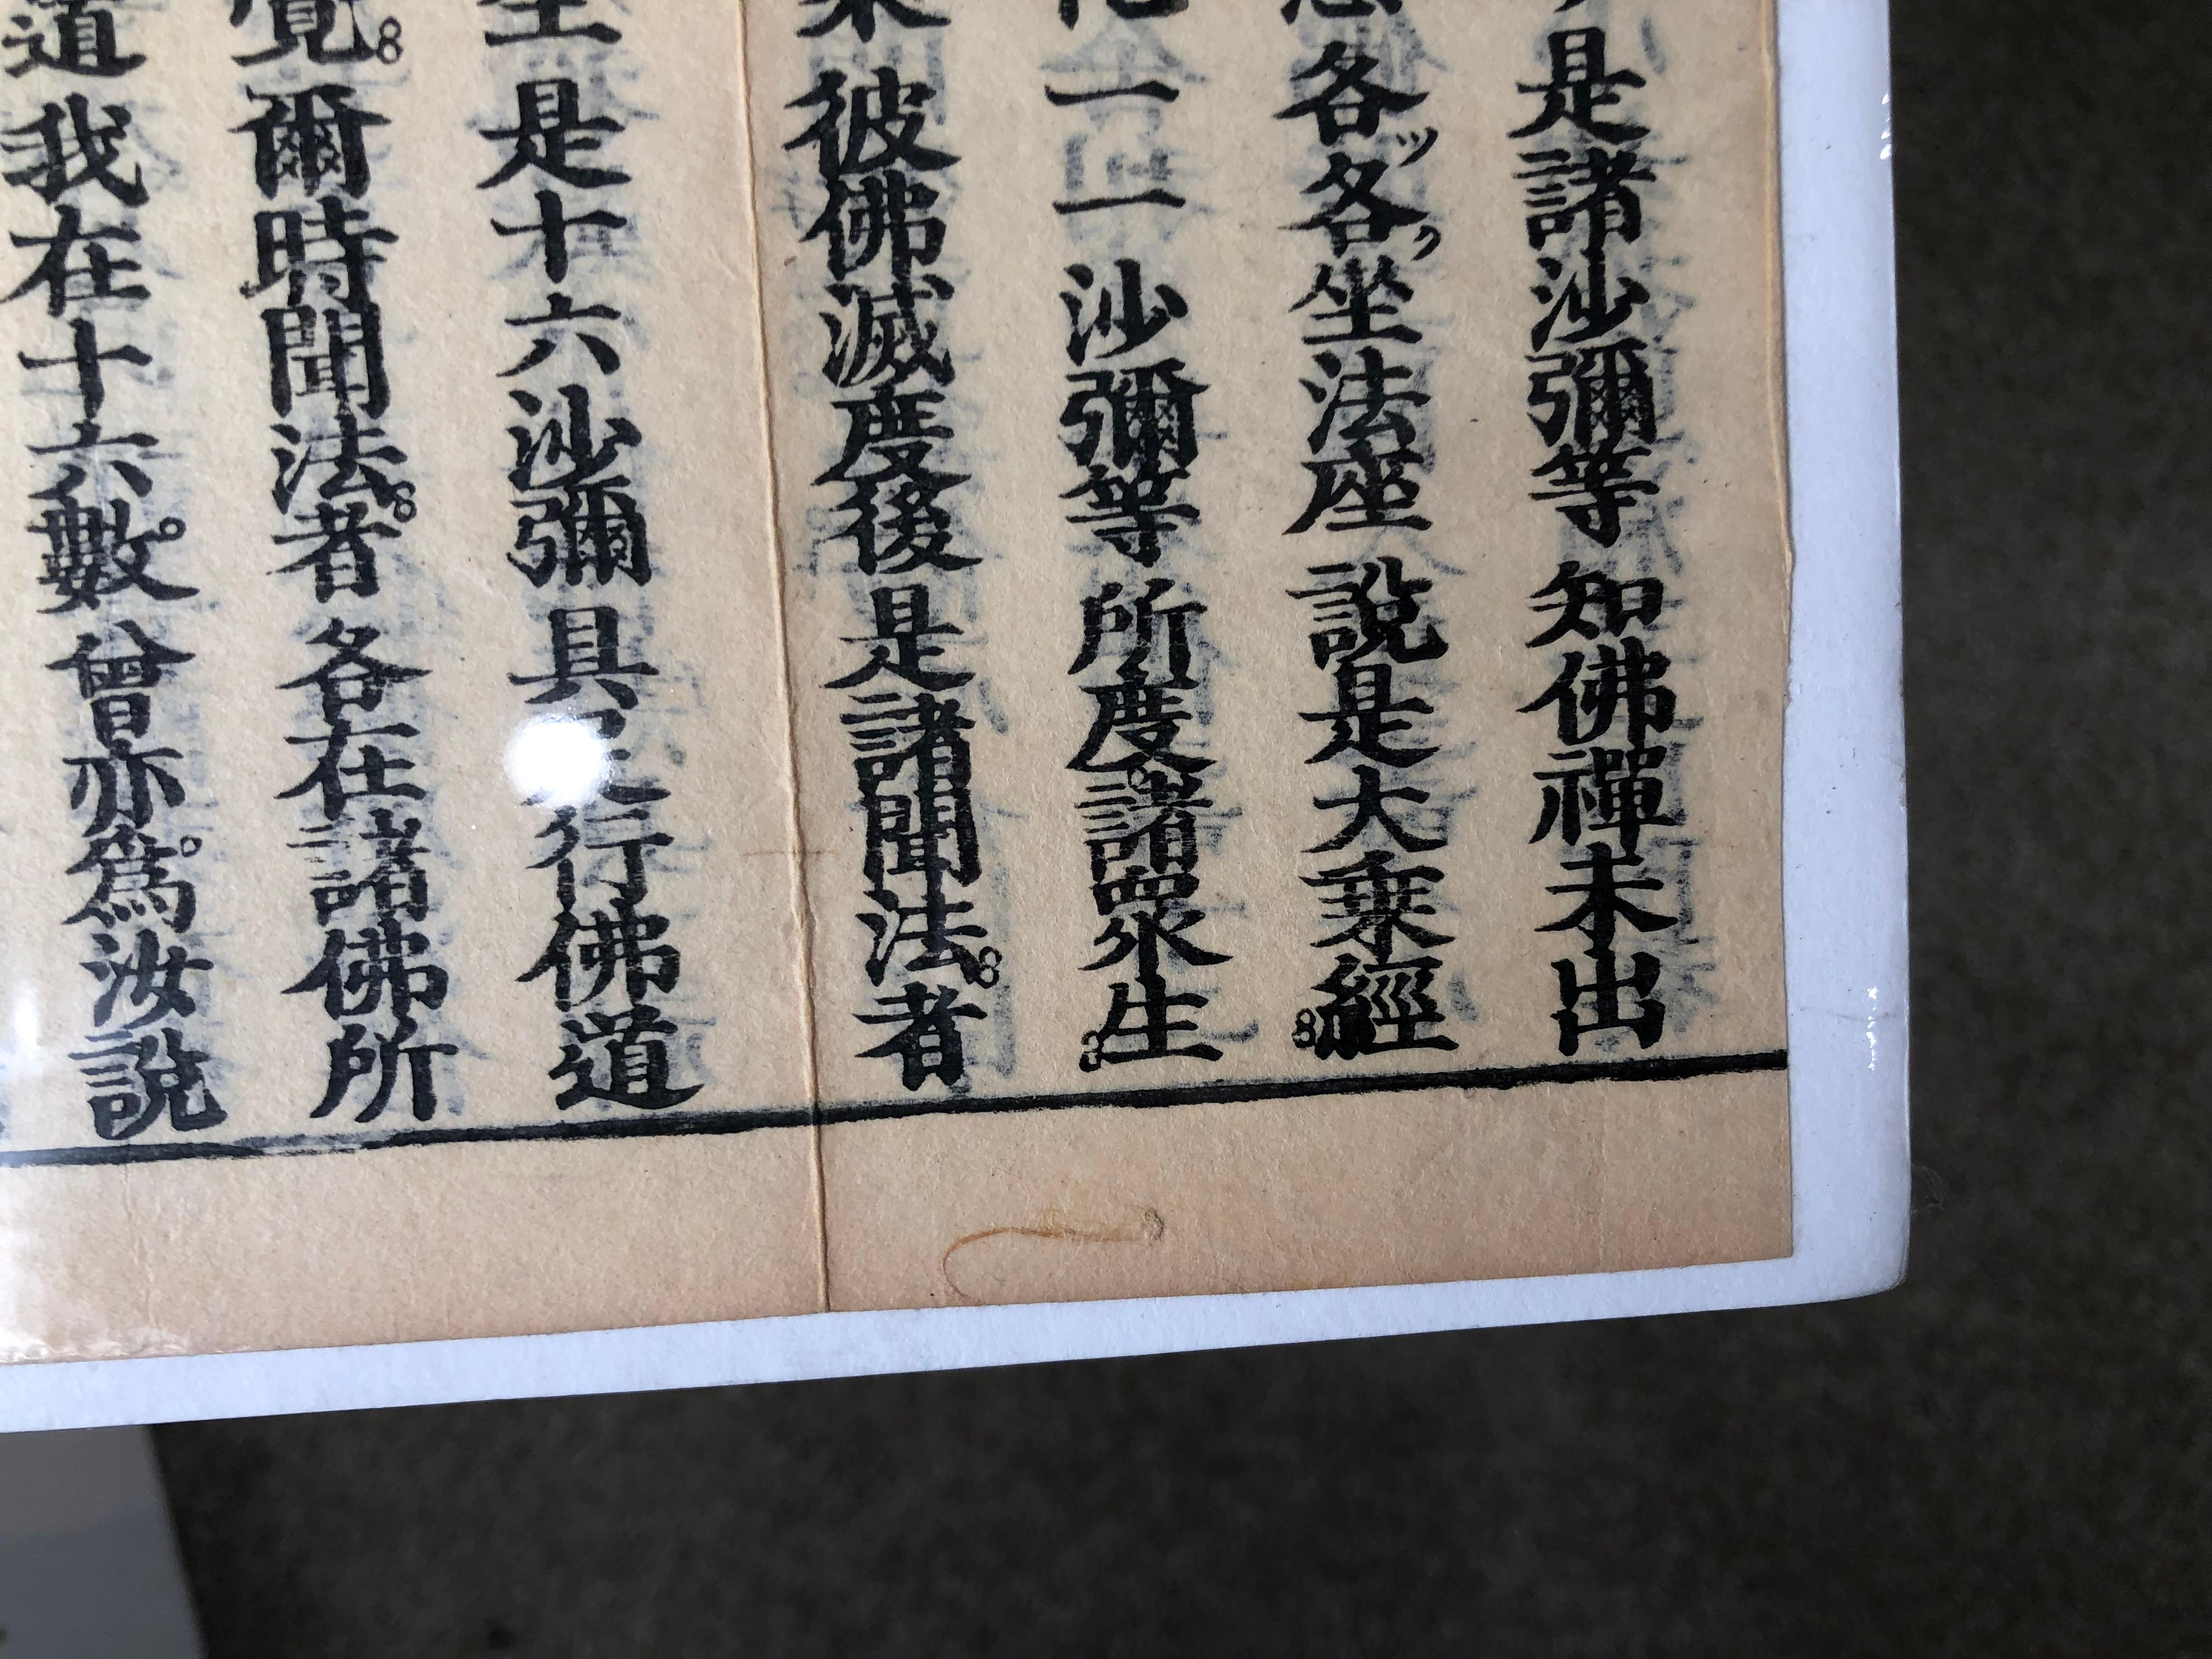 Japanese Four Antique Buddhist SACRED SUTRAS Woodblock Prints 1878, Frameable #1 8